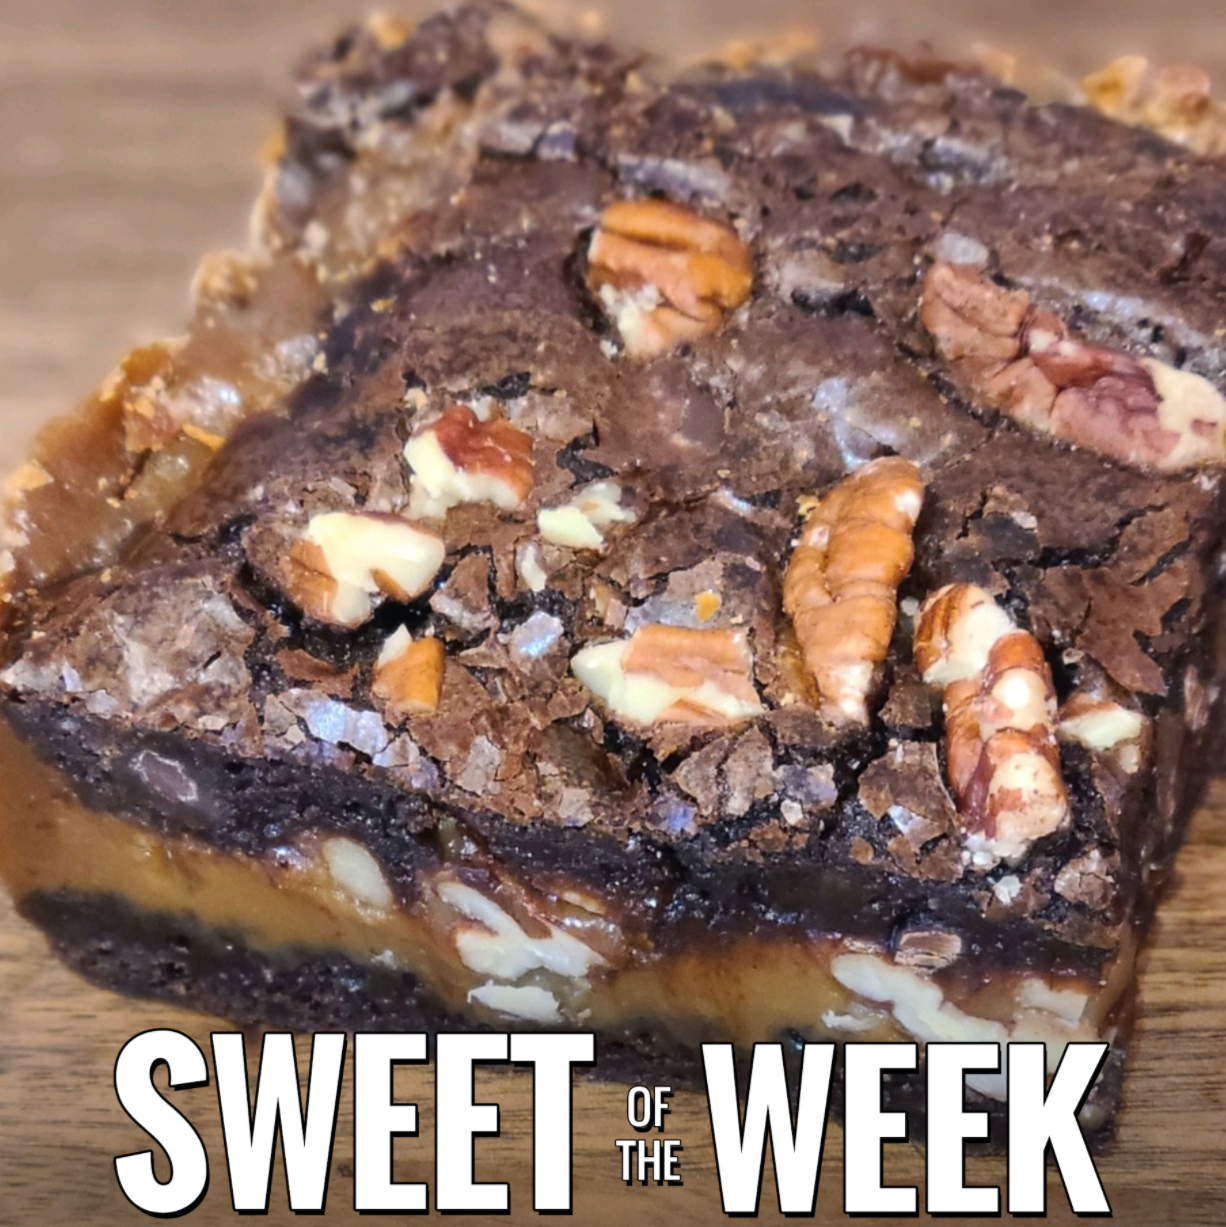 You are currently viewing Jonny C’s Sweet of the Week